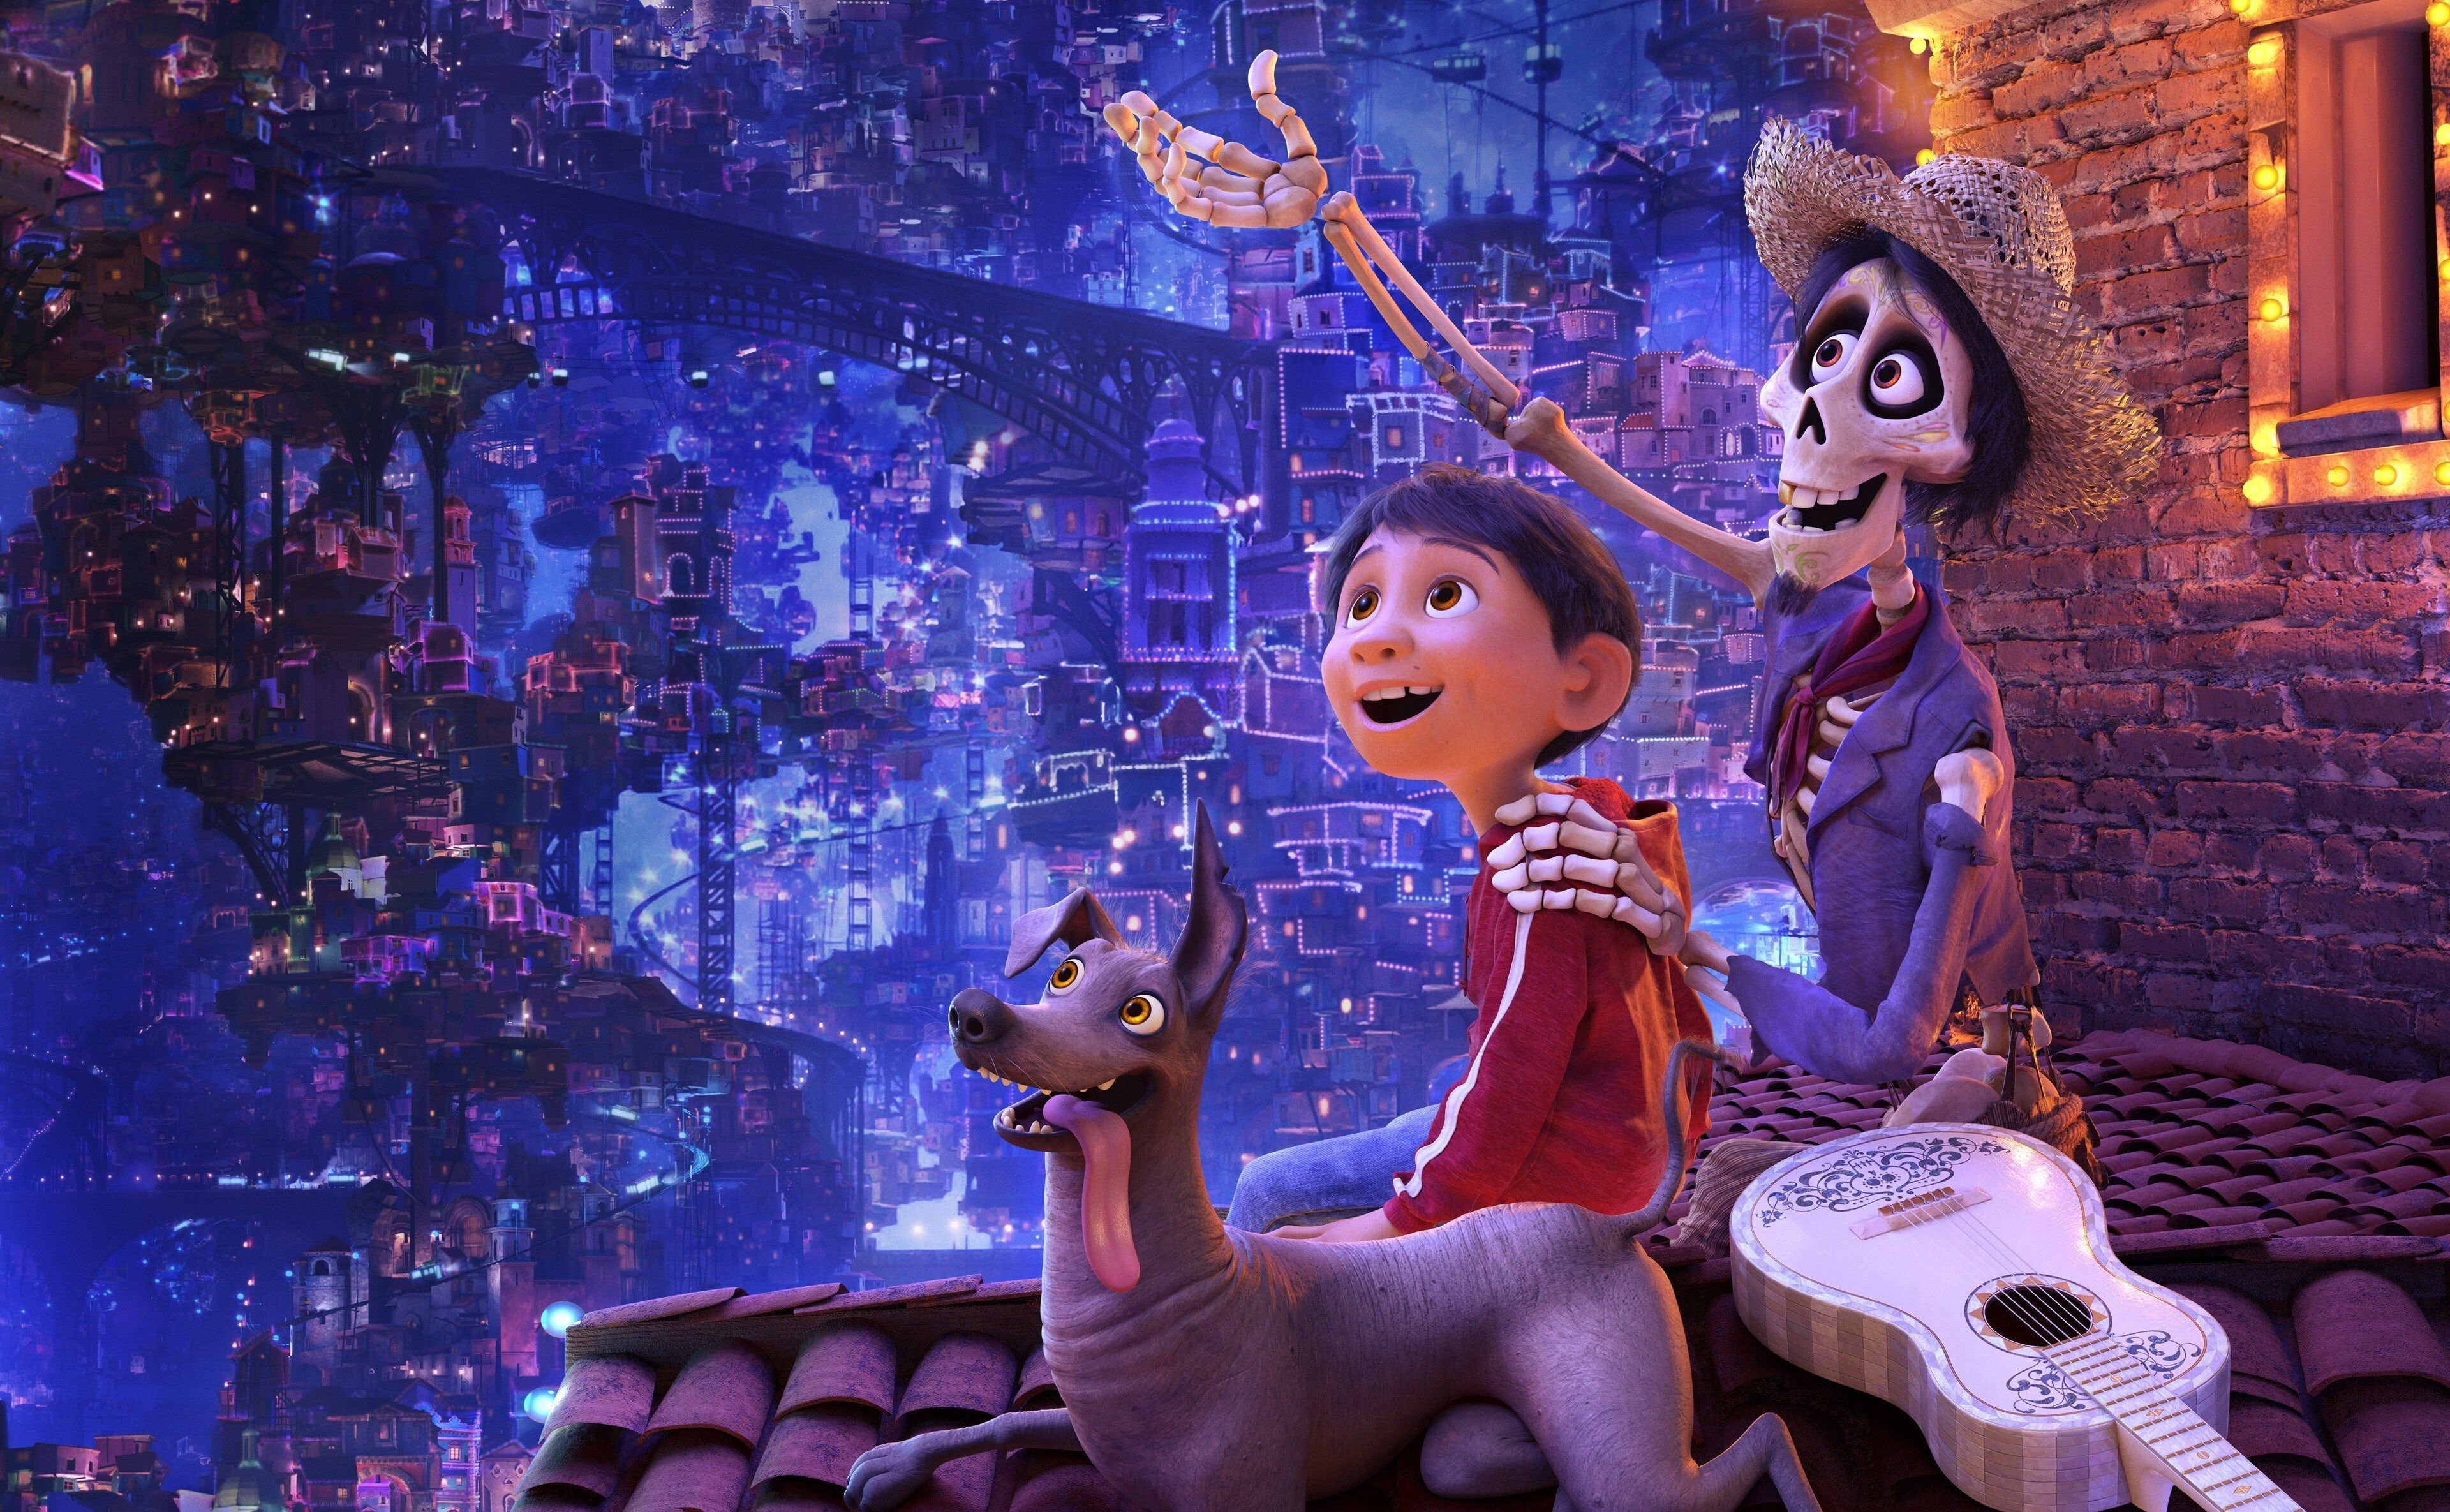 coco 4k free wallpaper downloads for pc. Animated movies, Disney fan art, Disney and dreamworks